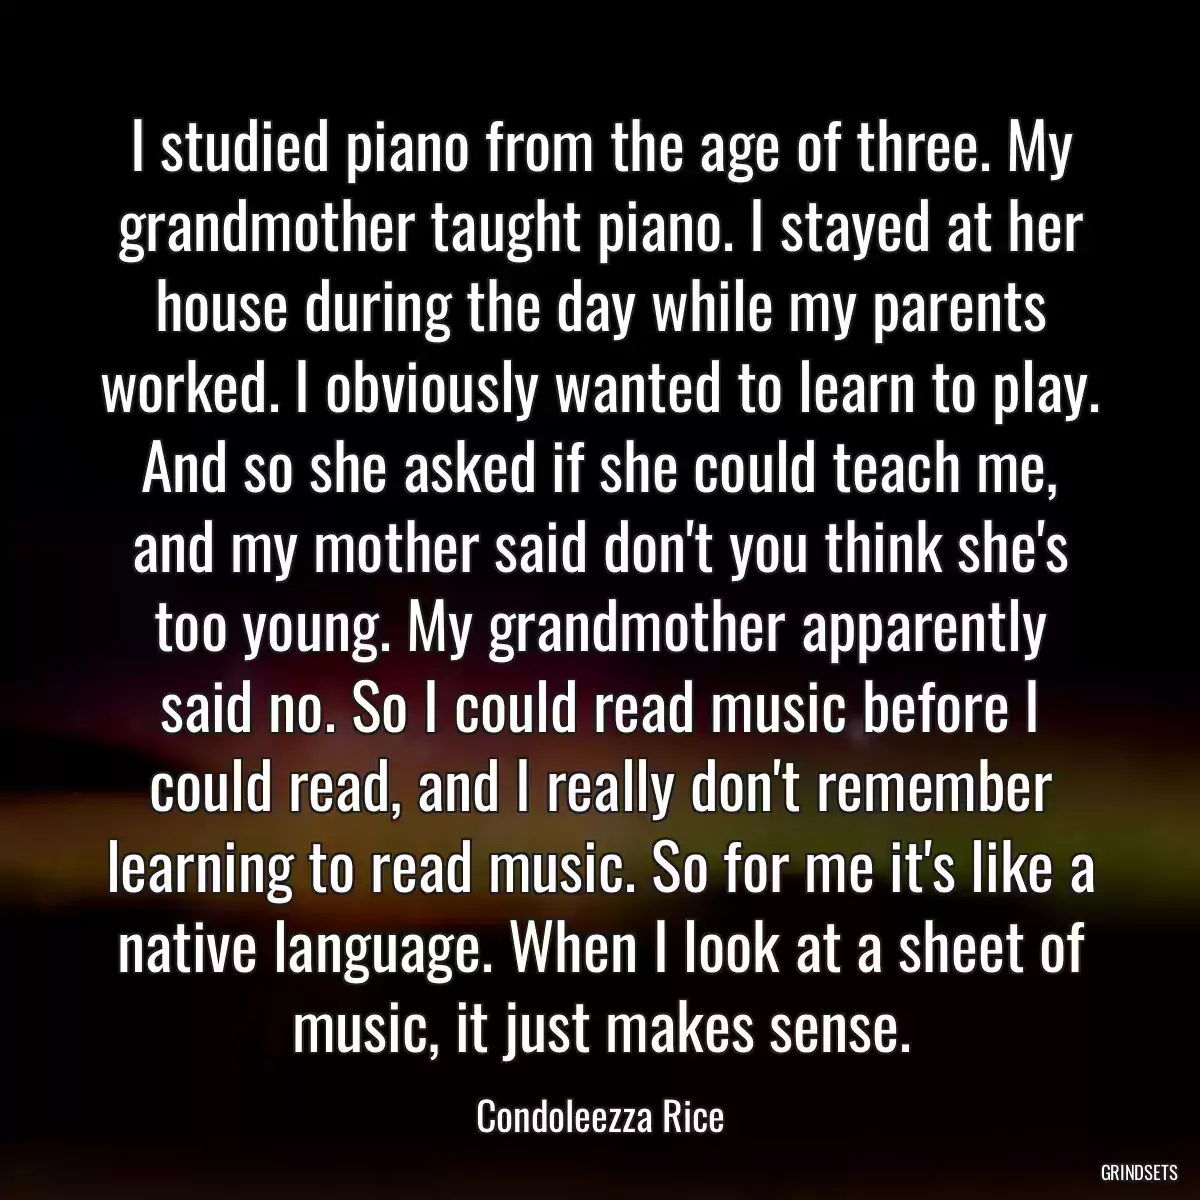 I studied piano from the age of three. My grandmother taught piano. I stayed at her house during the day while my parents worked. I obviously wanted to learn to play. And so she asked if she could teach me, and my mother said don\'t you think she\'s too young. My grandmother apparently said no. So I could read music before I could read, and I really don\'t remember learning to read music. So for me it\'s like a native language. When I look at a sheet of music, it just makes sense.